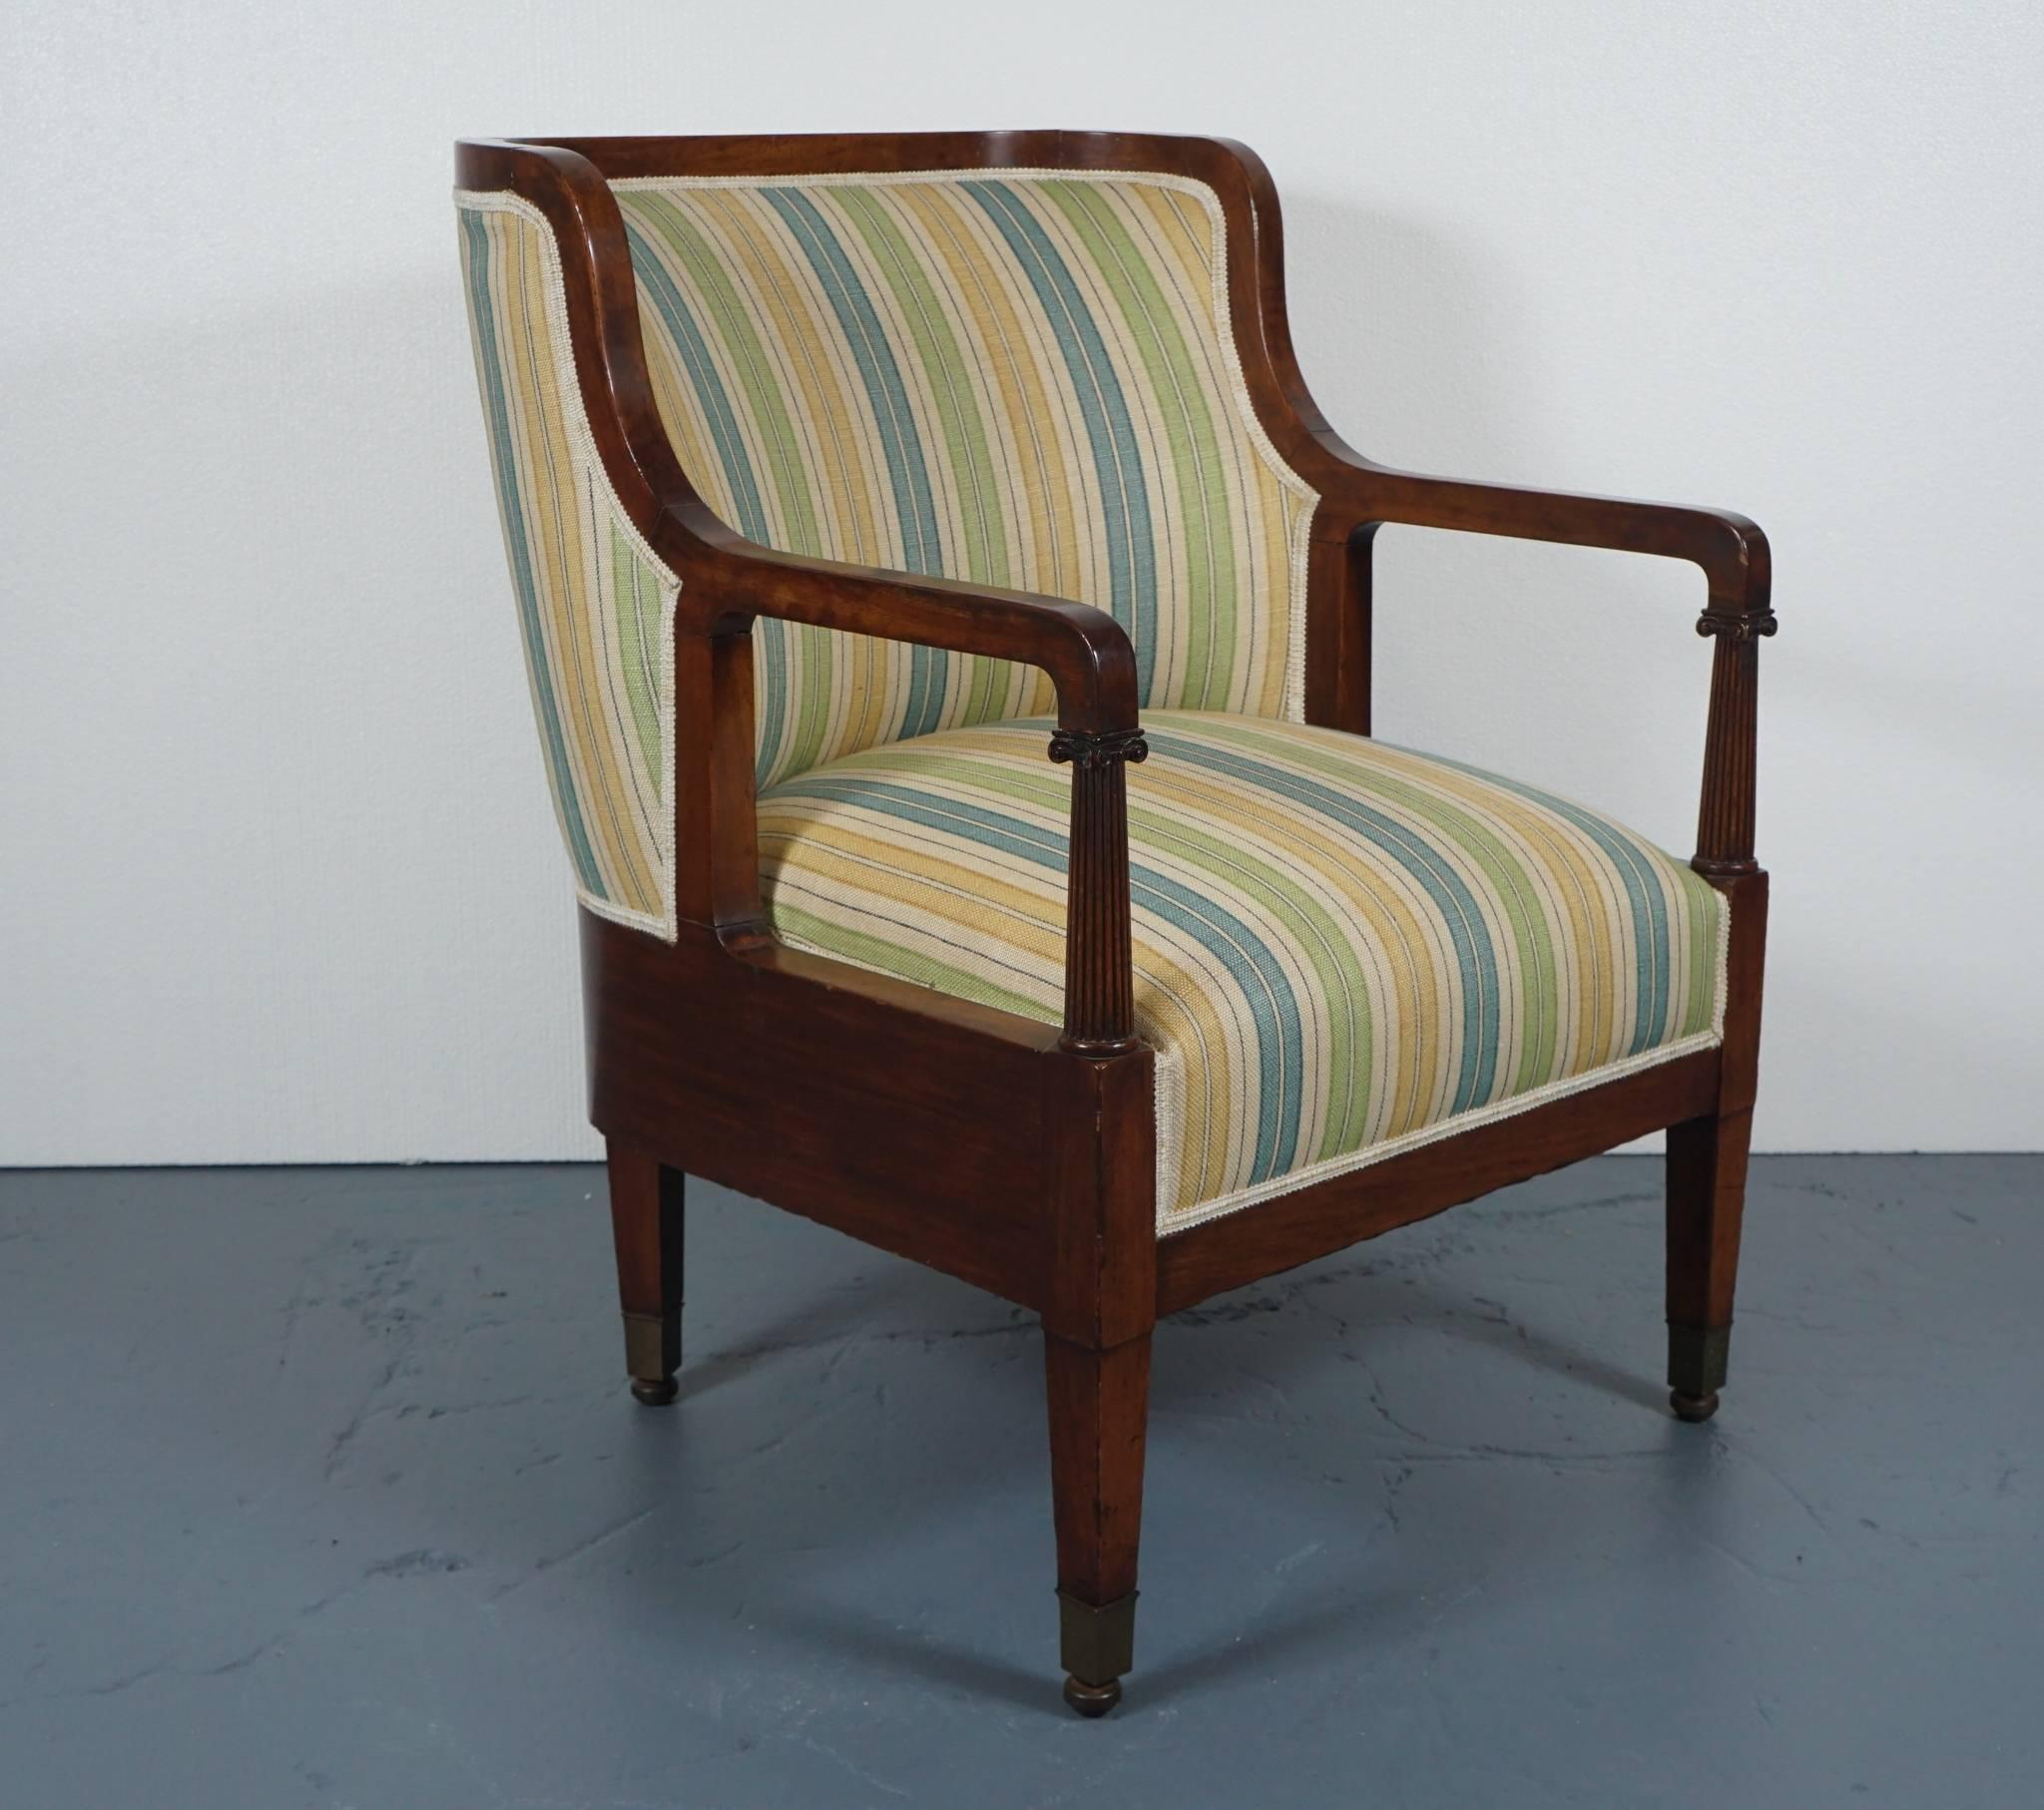 English Empire Mahogany Chair in Striped Fabric For Sale